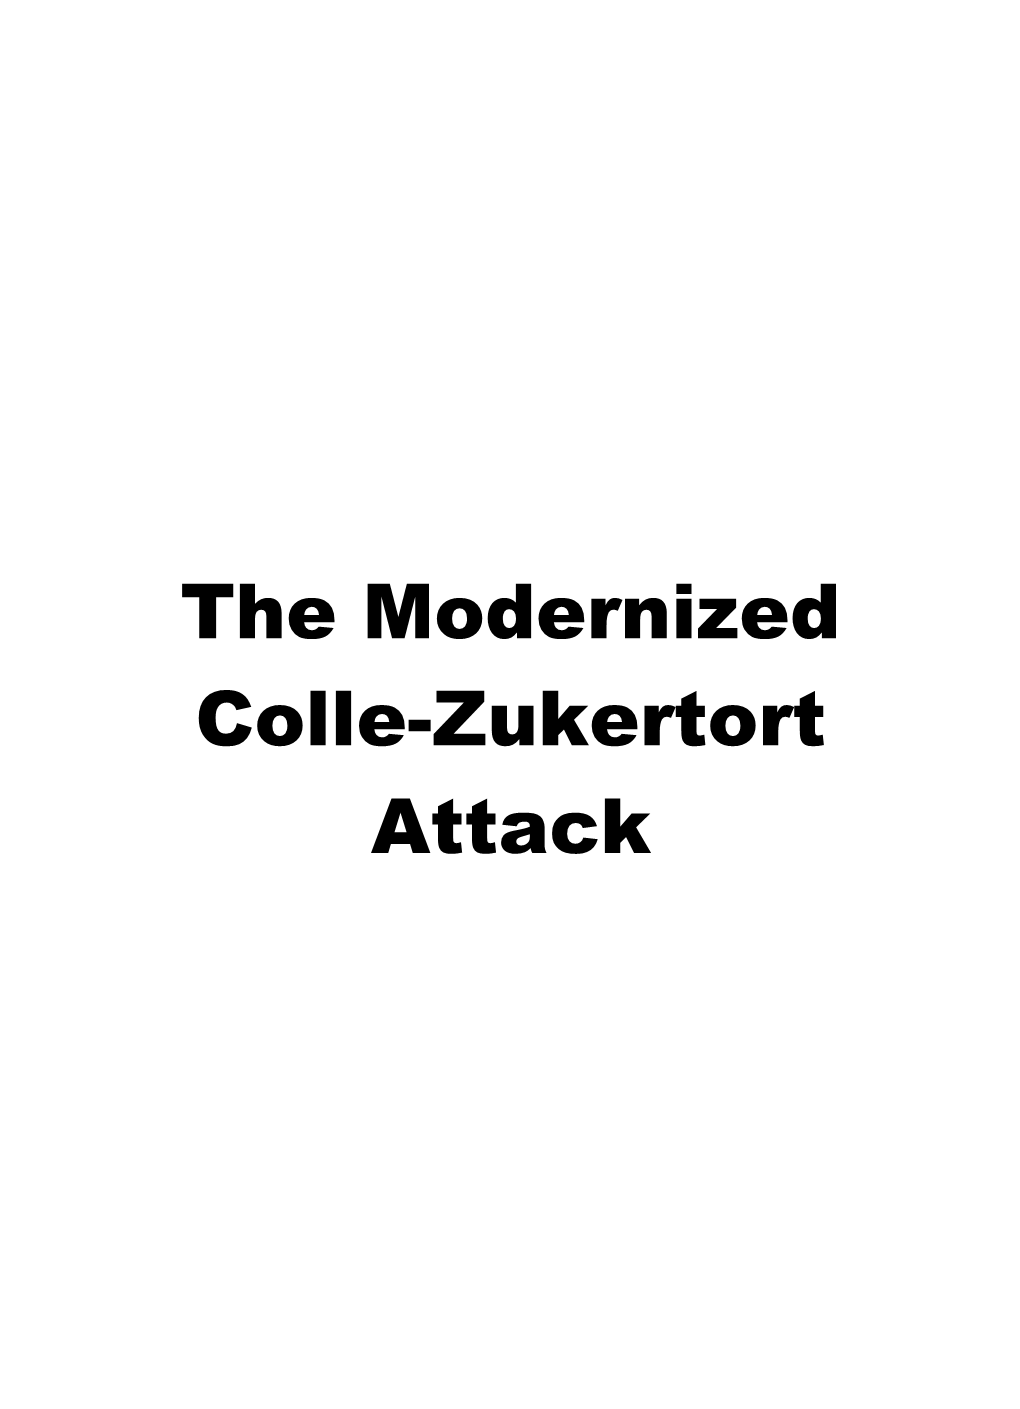 The Modernized Colle-Zukertort Attack First Edition 2019 by Thinkers Publishing Copyright © 2019 Milos Pavlovic